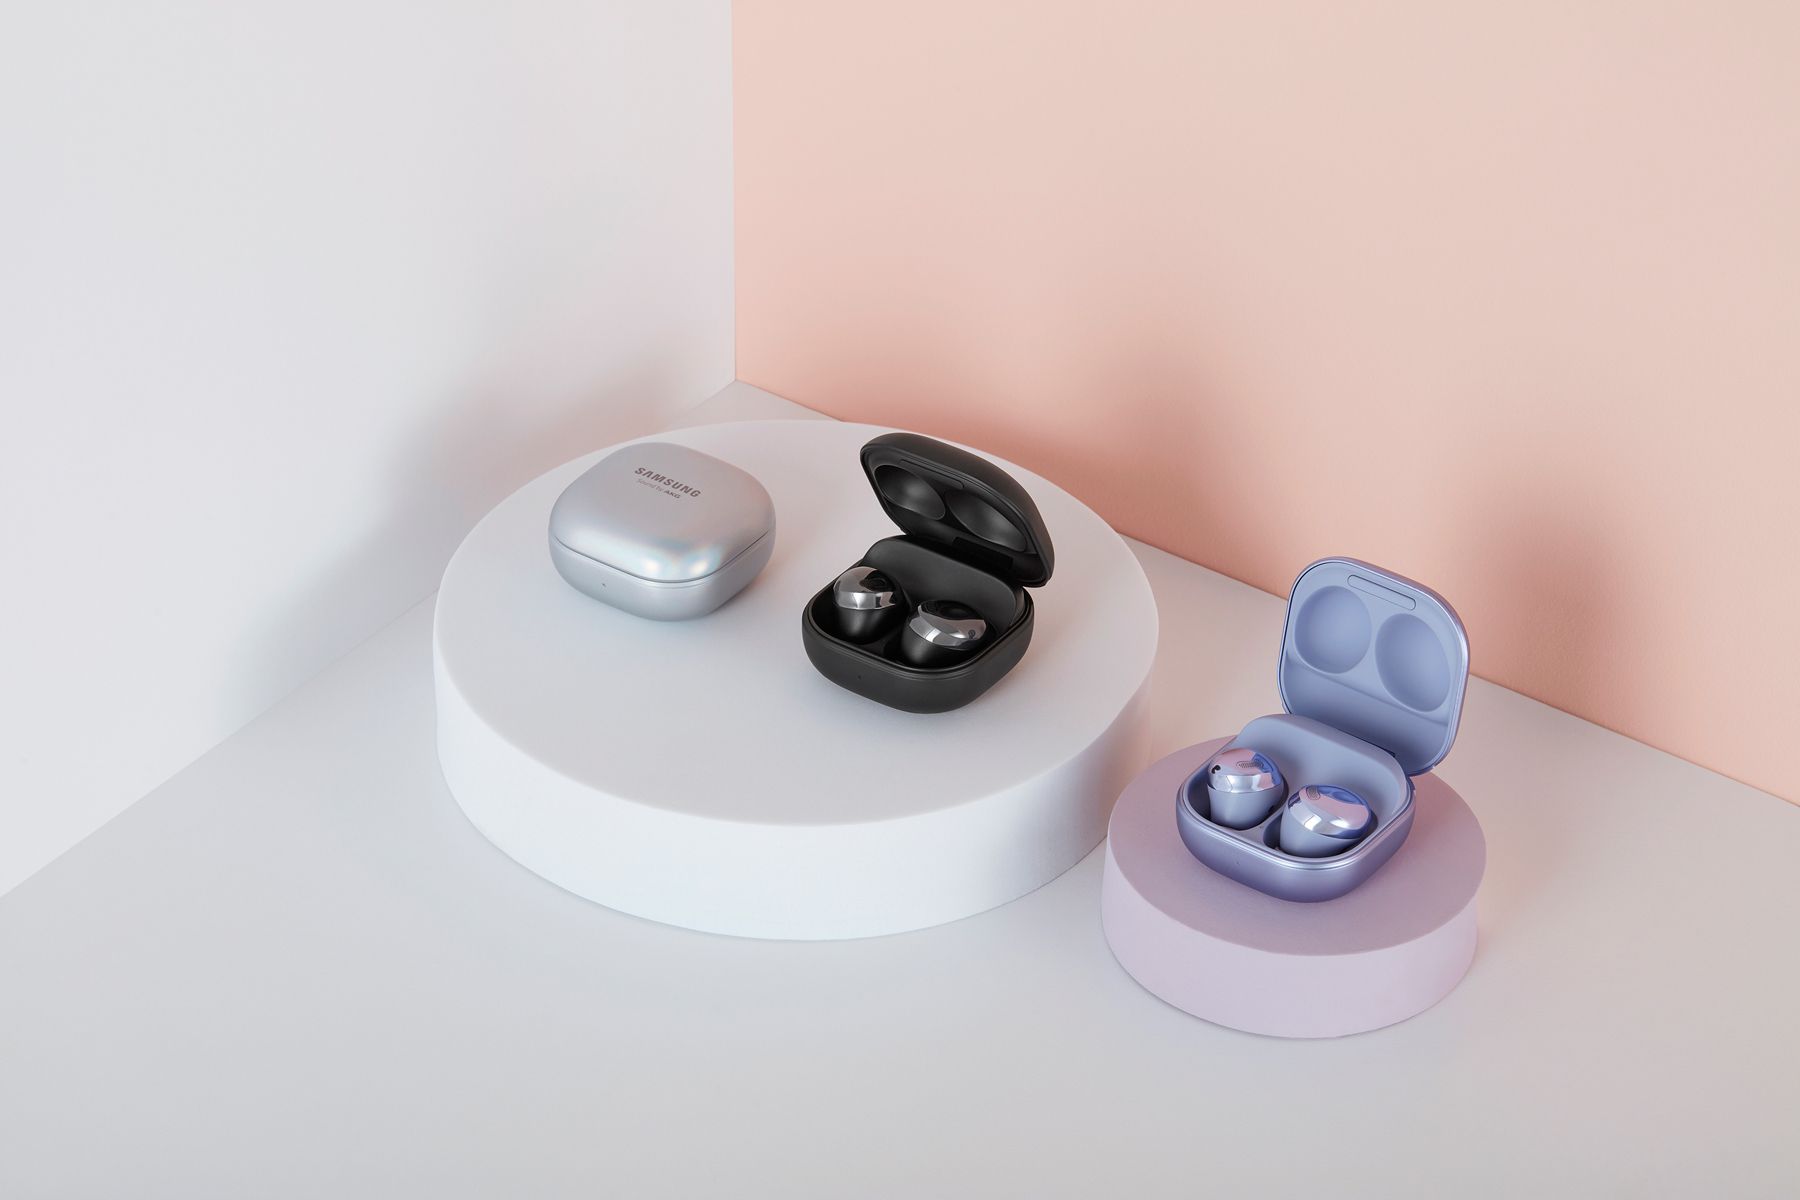 The Samsung Galaxy Buds Pro and Galaxy Buds 2 may be causing